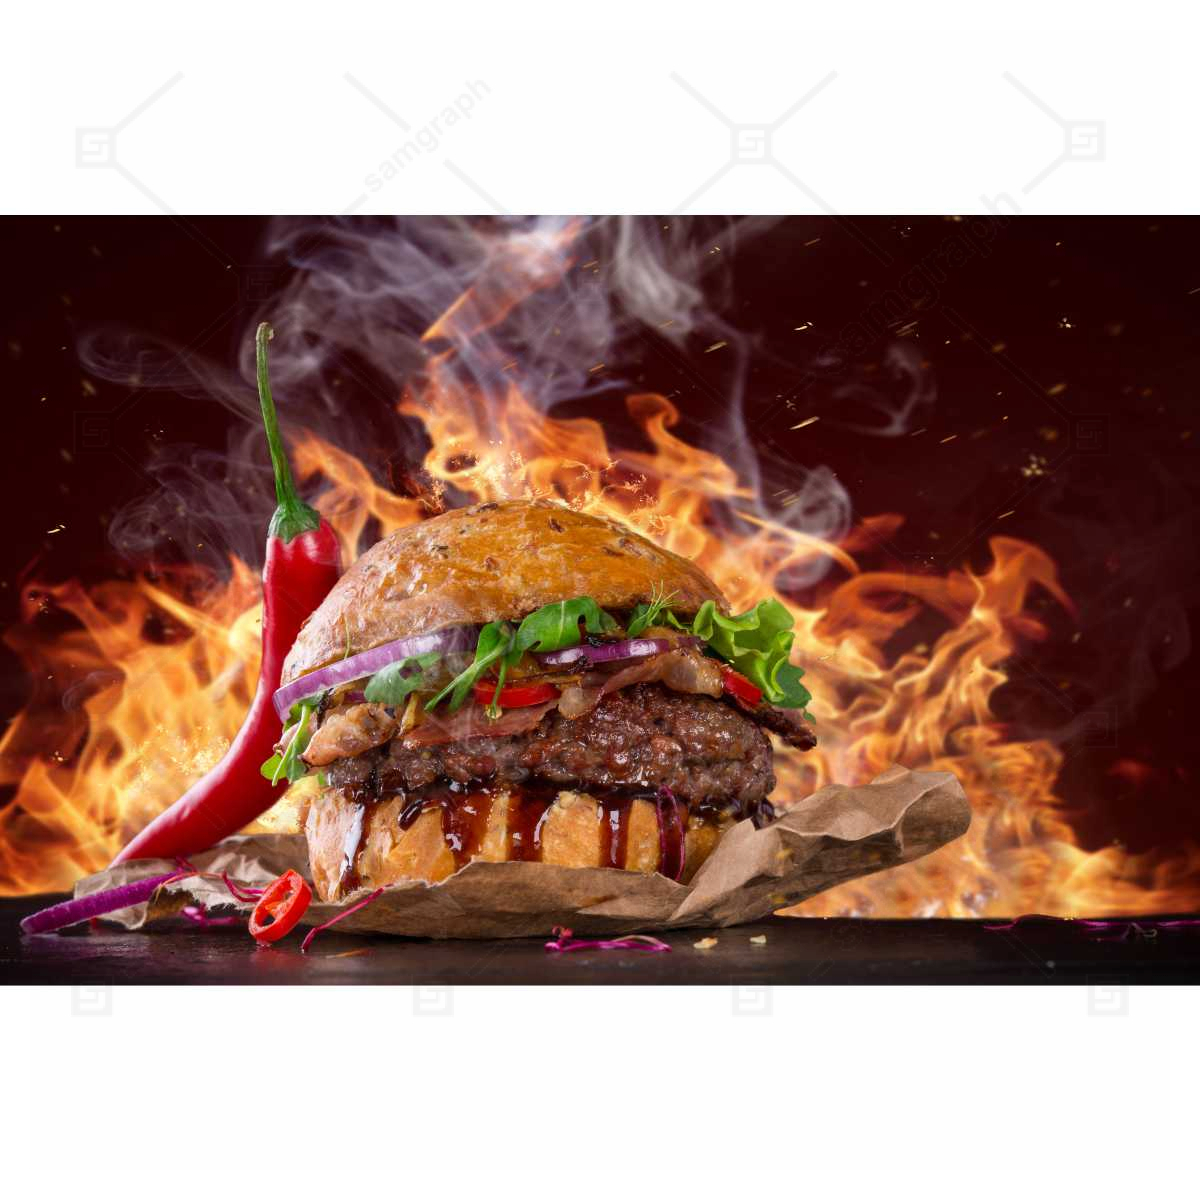 High quality photo of juicy hamburger with fire and pepper lettuce onion parsley 2 1 عکس ترشیجات در ظرف نگهدارنده